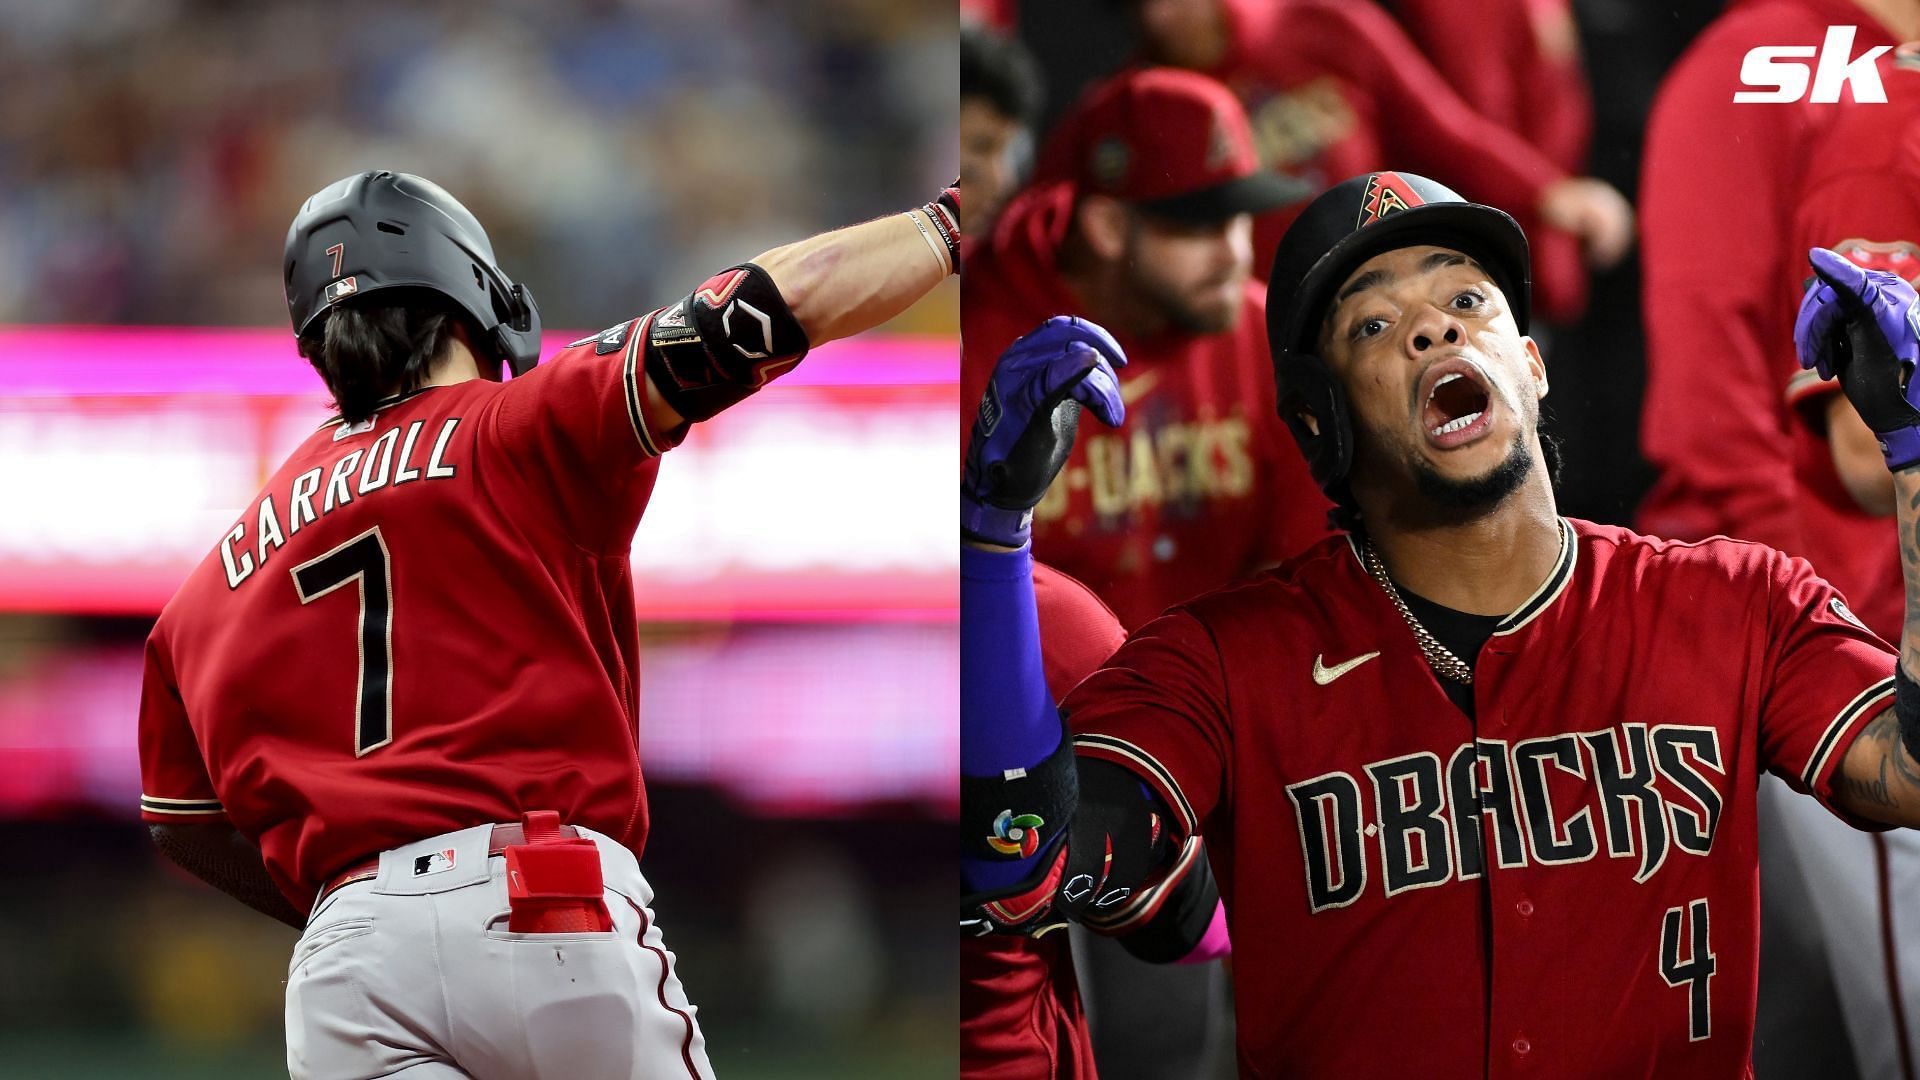 Diamondbacks fans wowed by back-to-back homers to draw level against Brewers. 